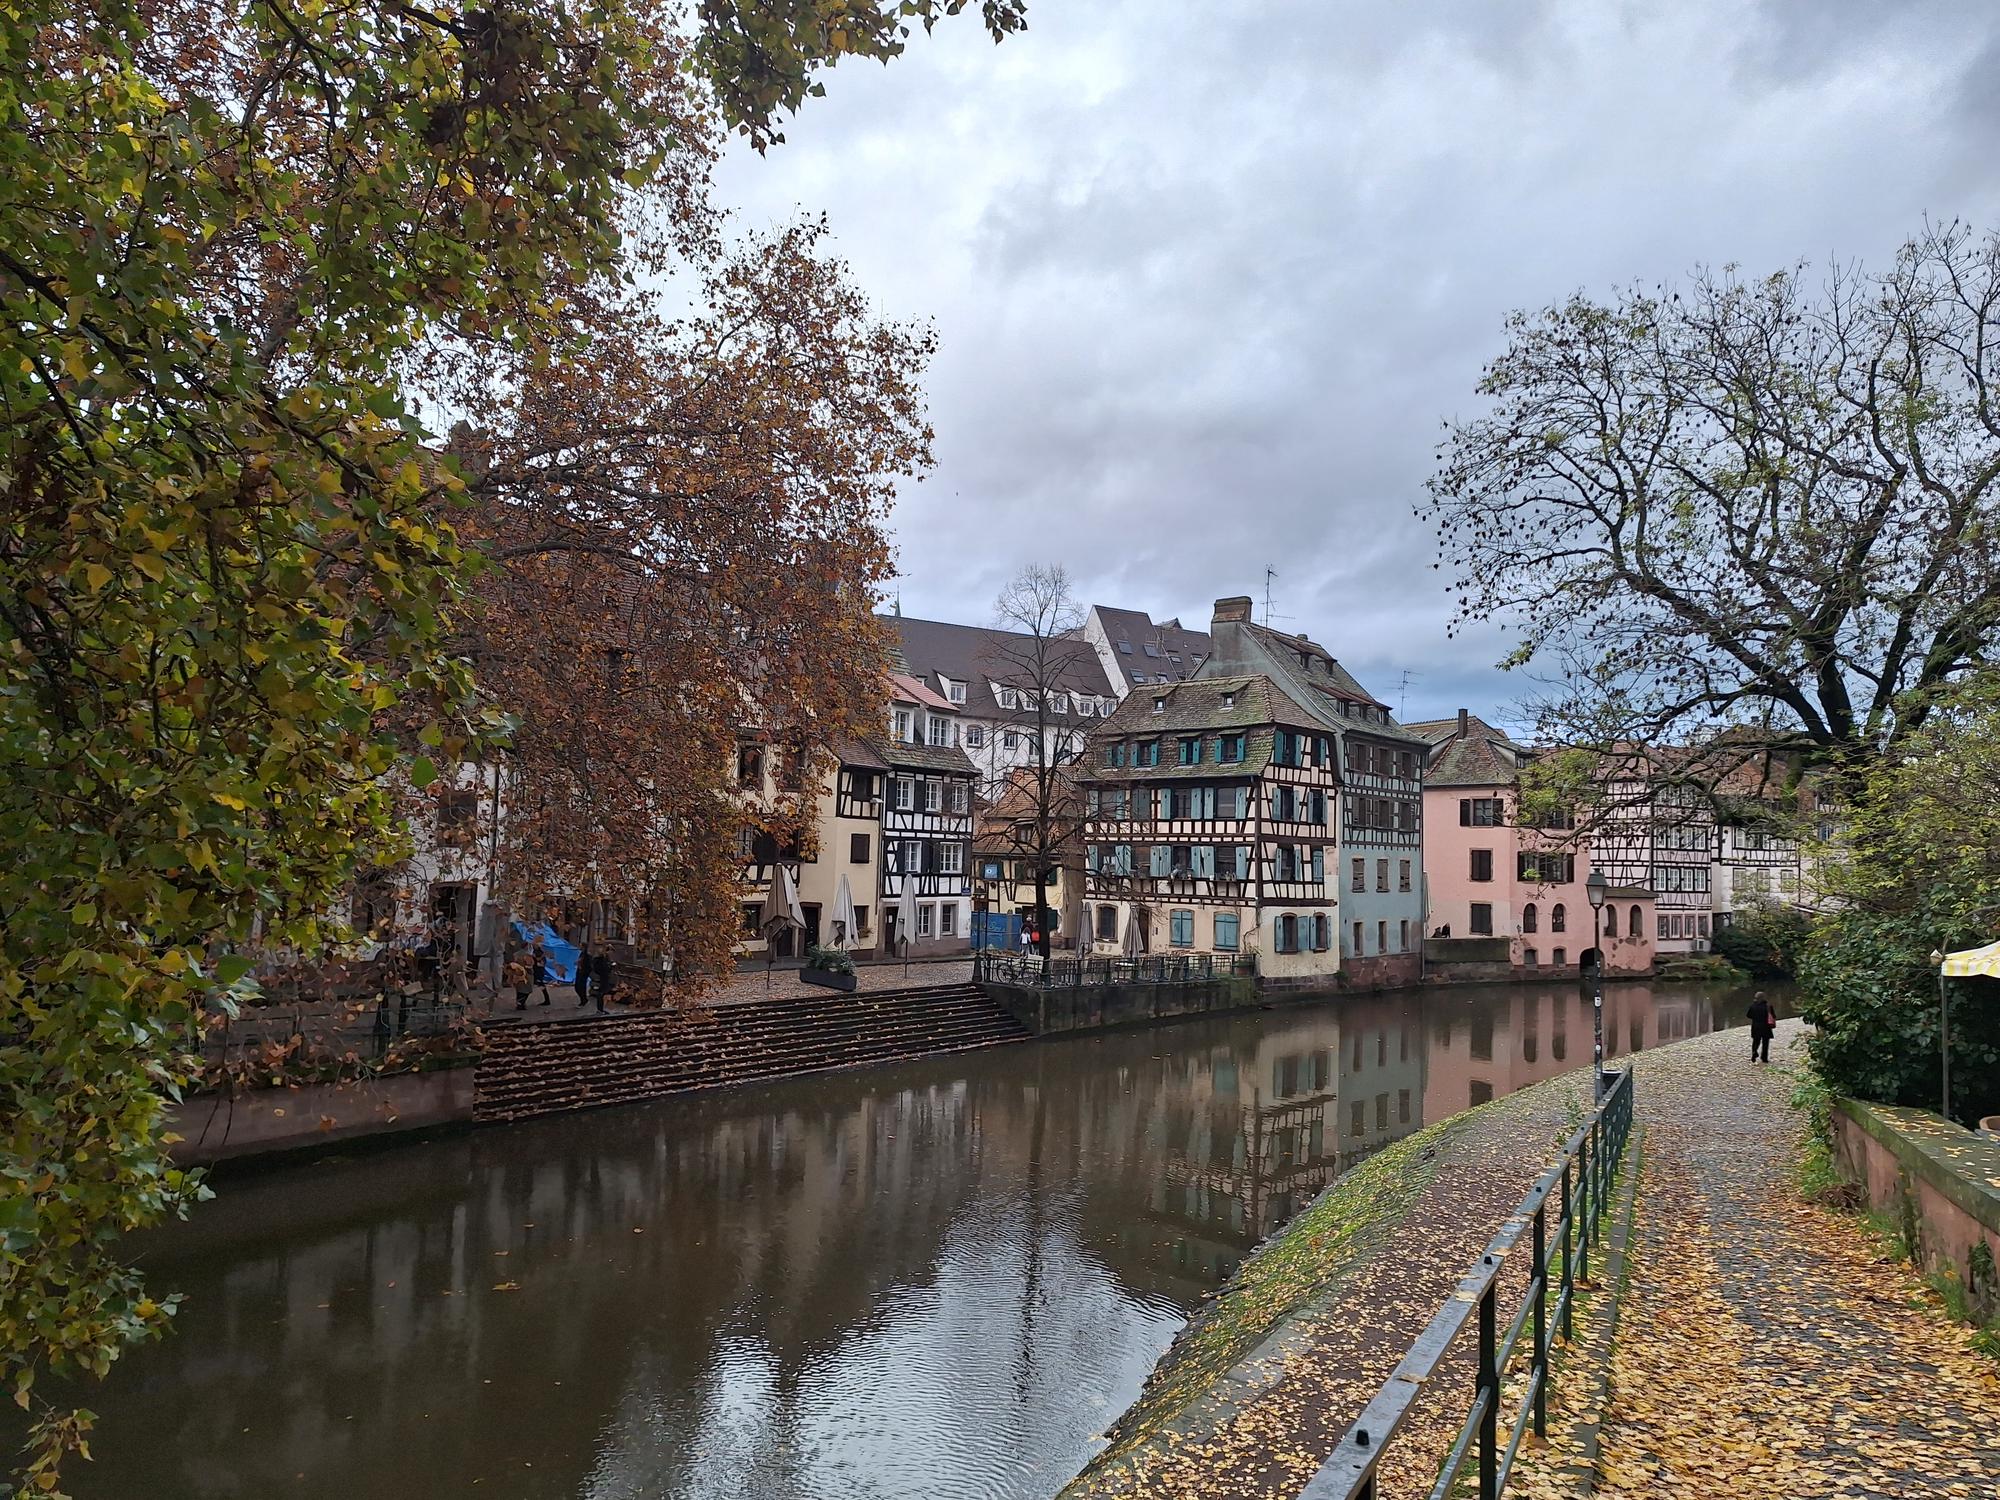 View of Strasbourg, old half-timbered houses by the water